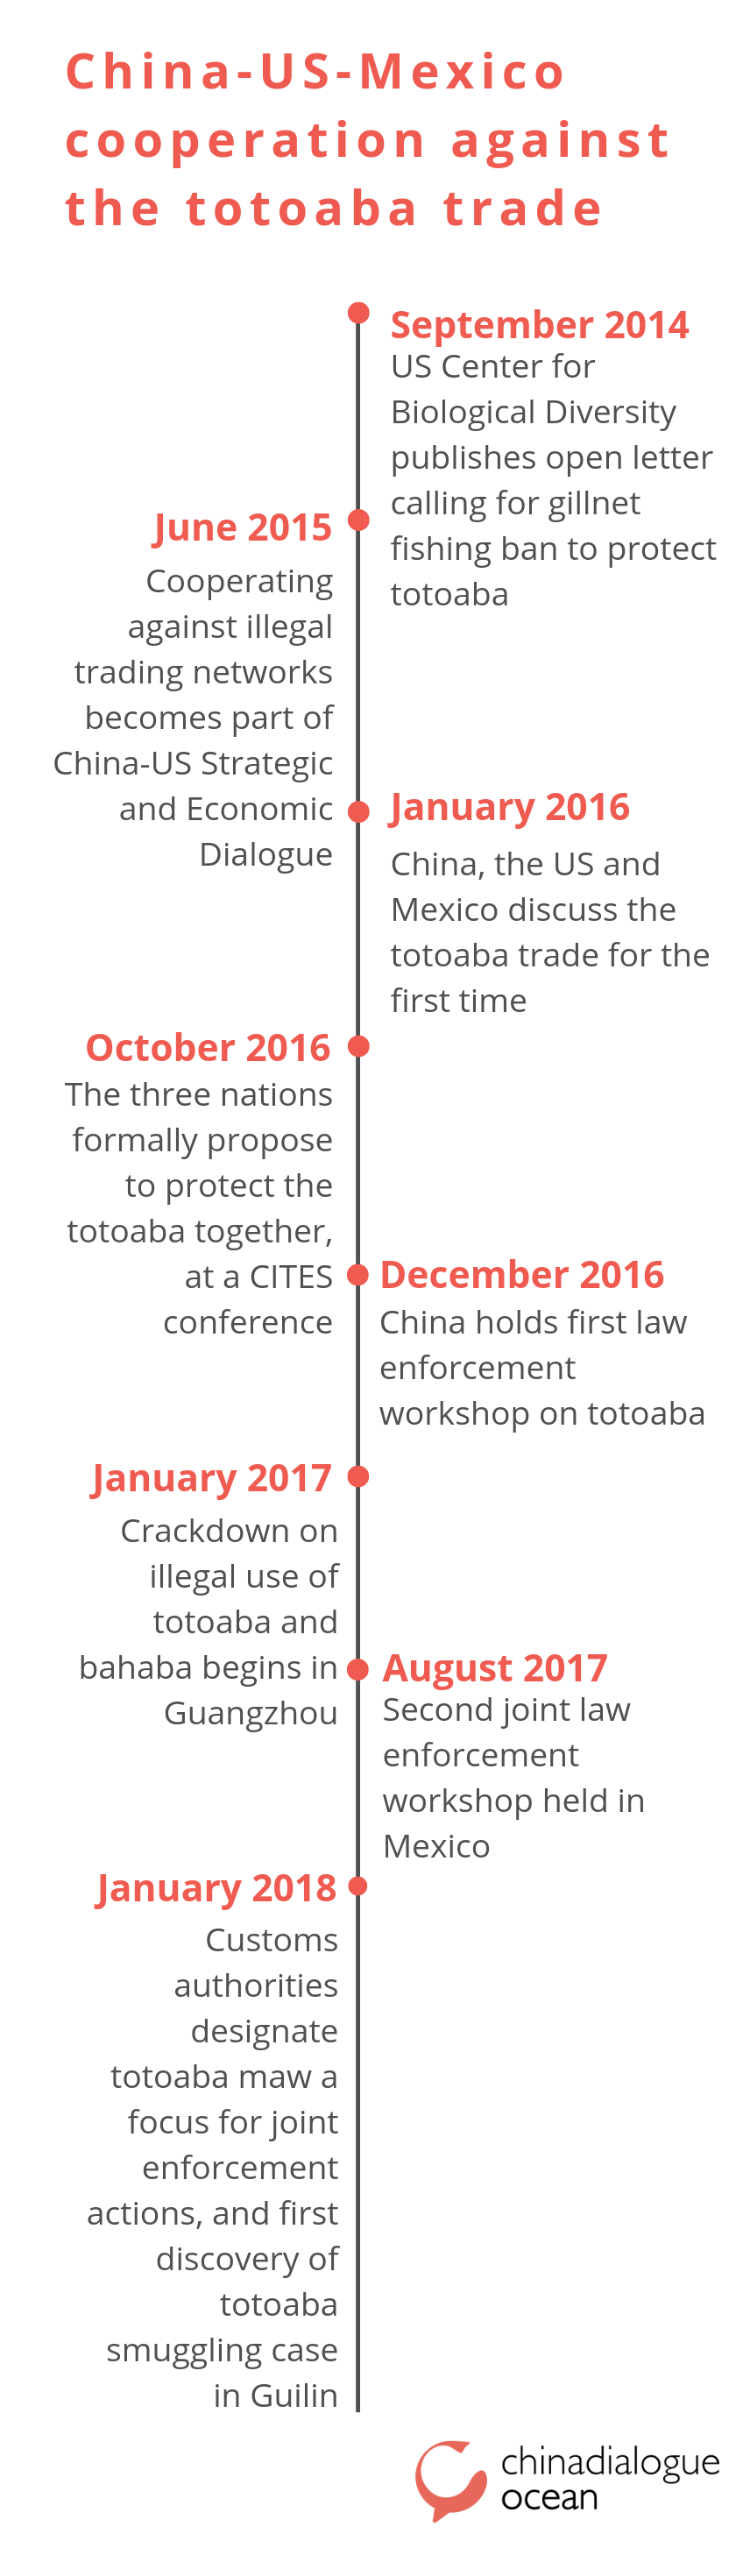 Timeline of China-US-Mexico cooperation against the trade in totoaba fish bladder